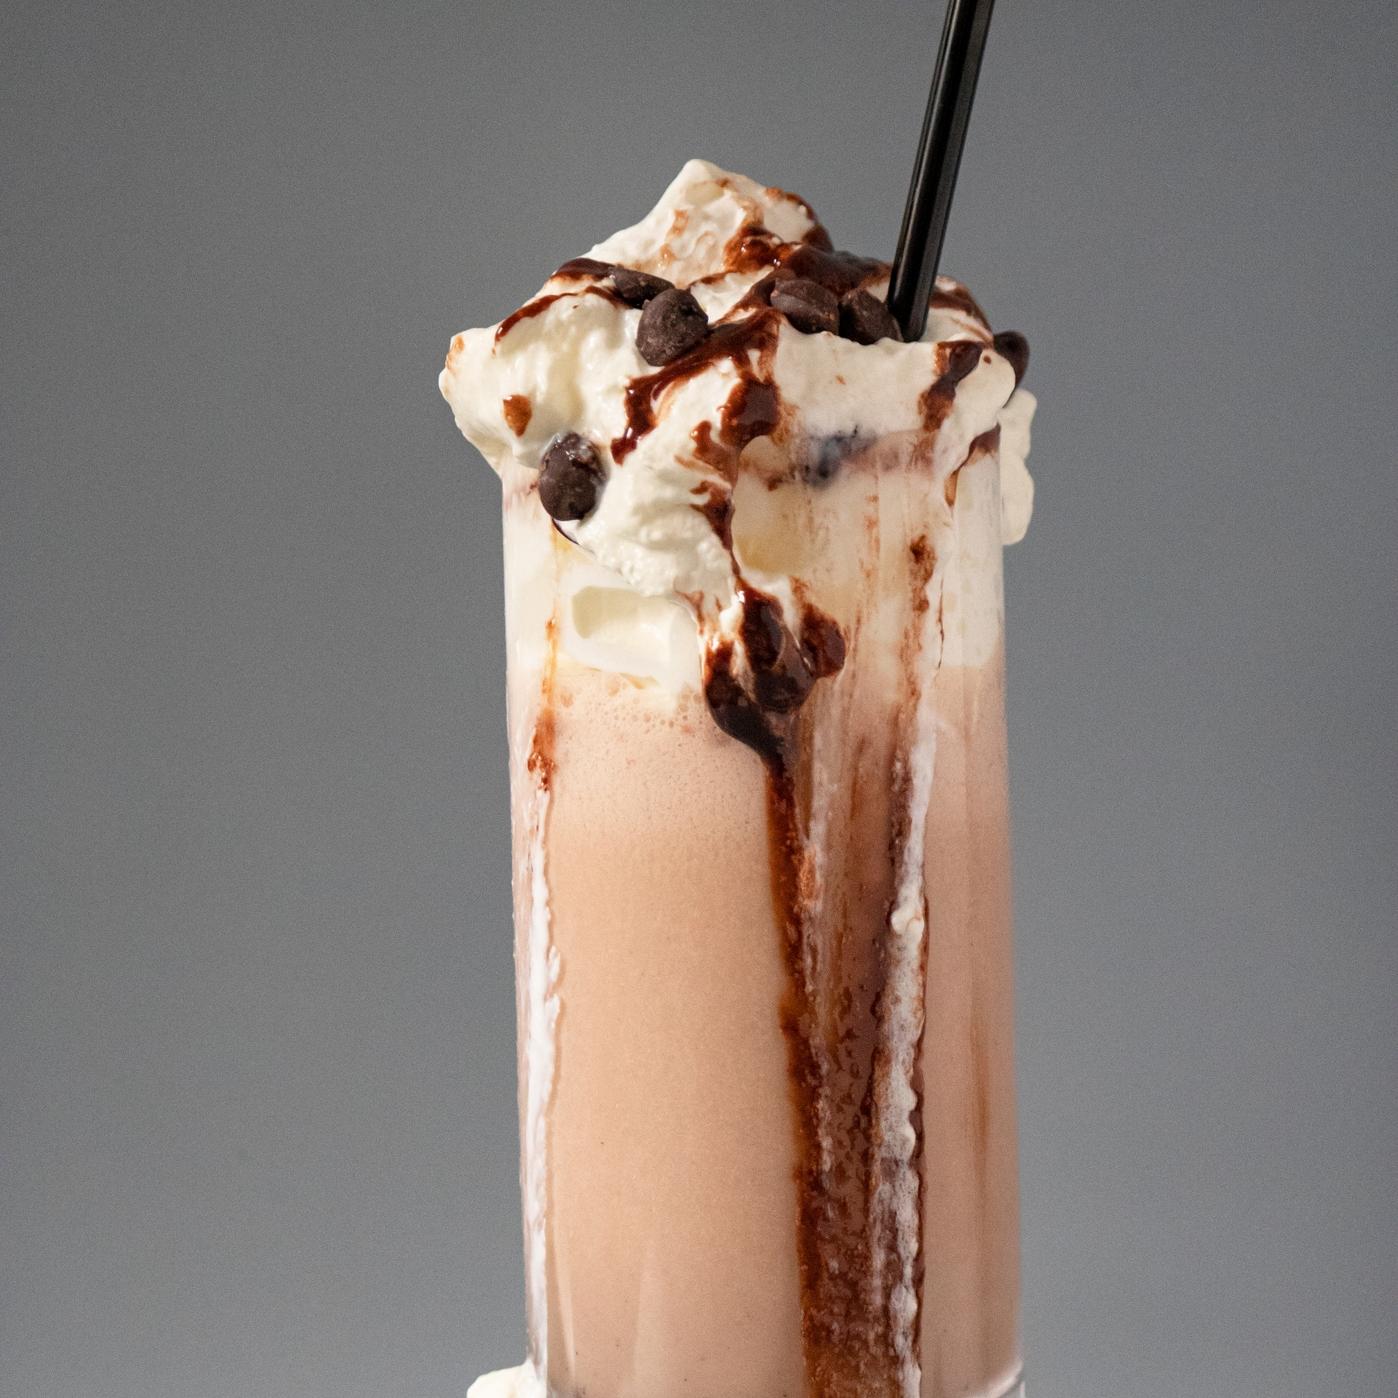  What's better than an iced coffee? An iced cappuccino!